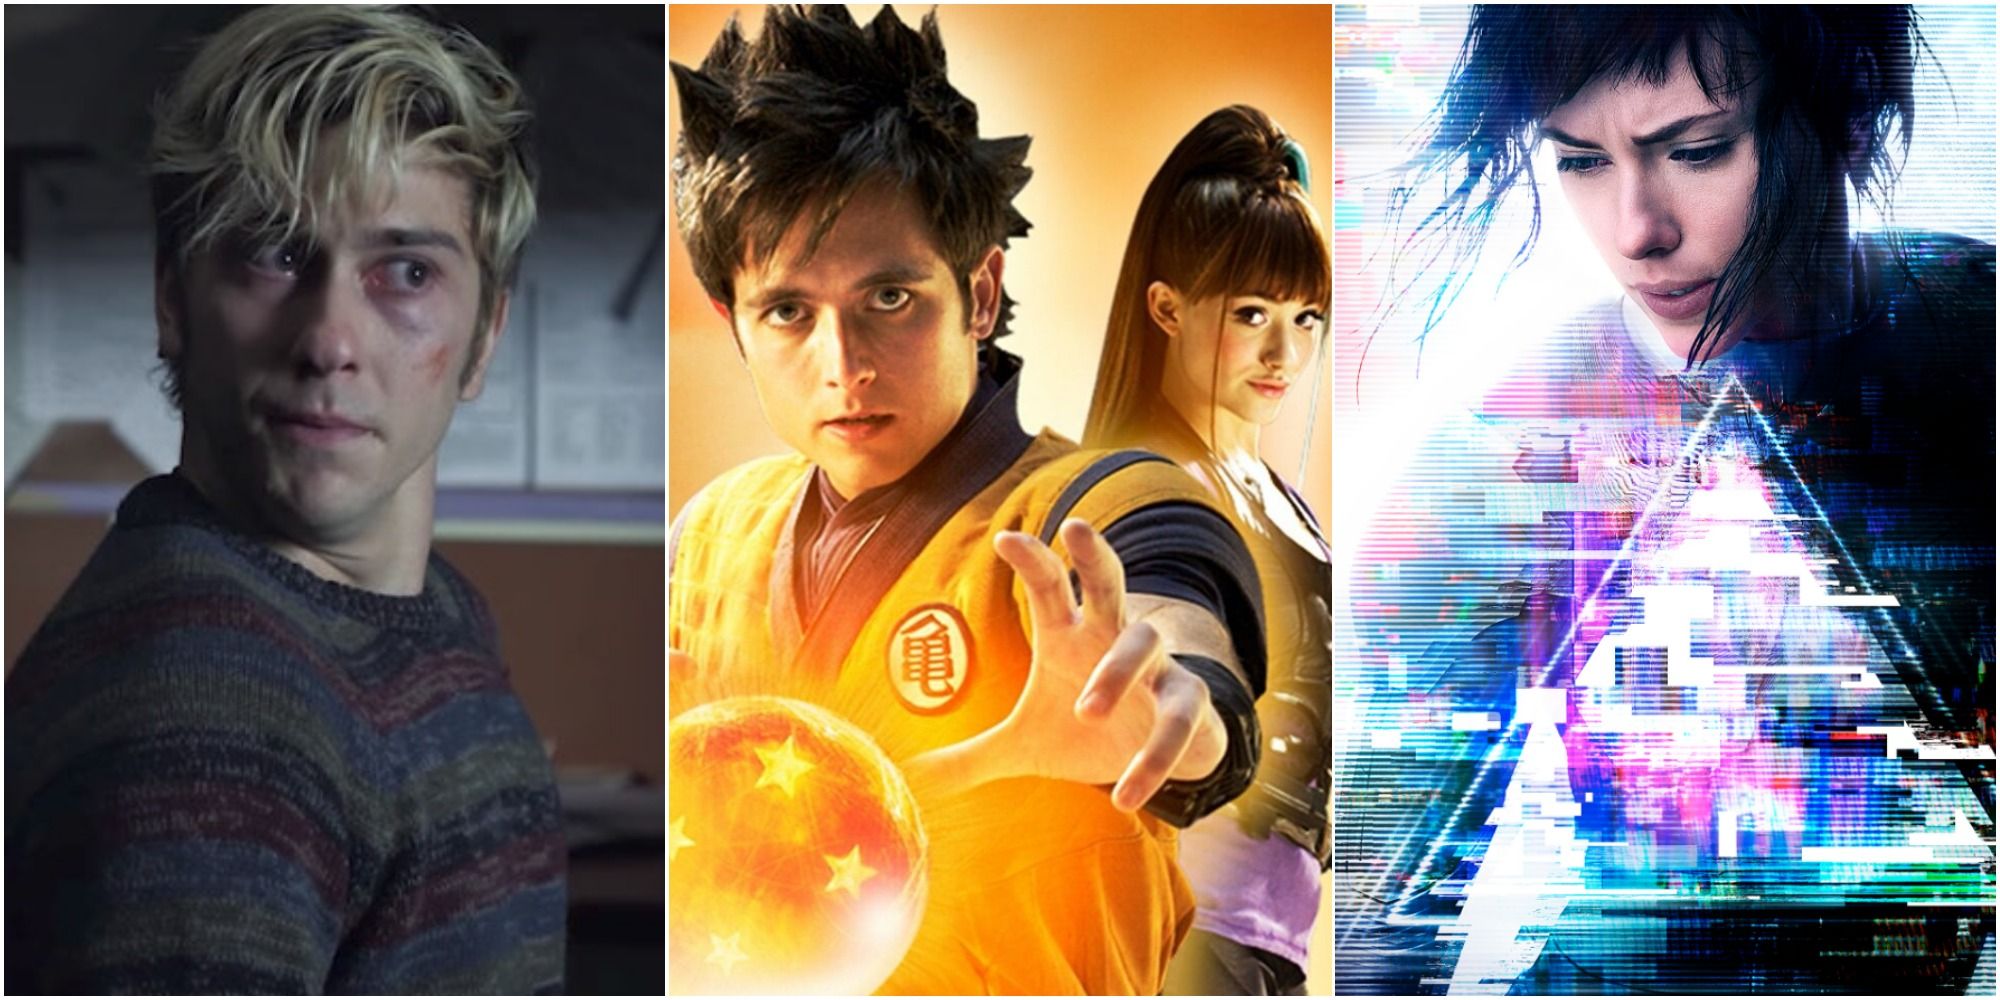 Dragonball Evolution &amp; 9 Other Worst Live-Action Movies Based On Anime